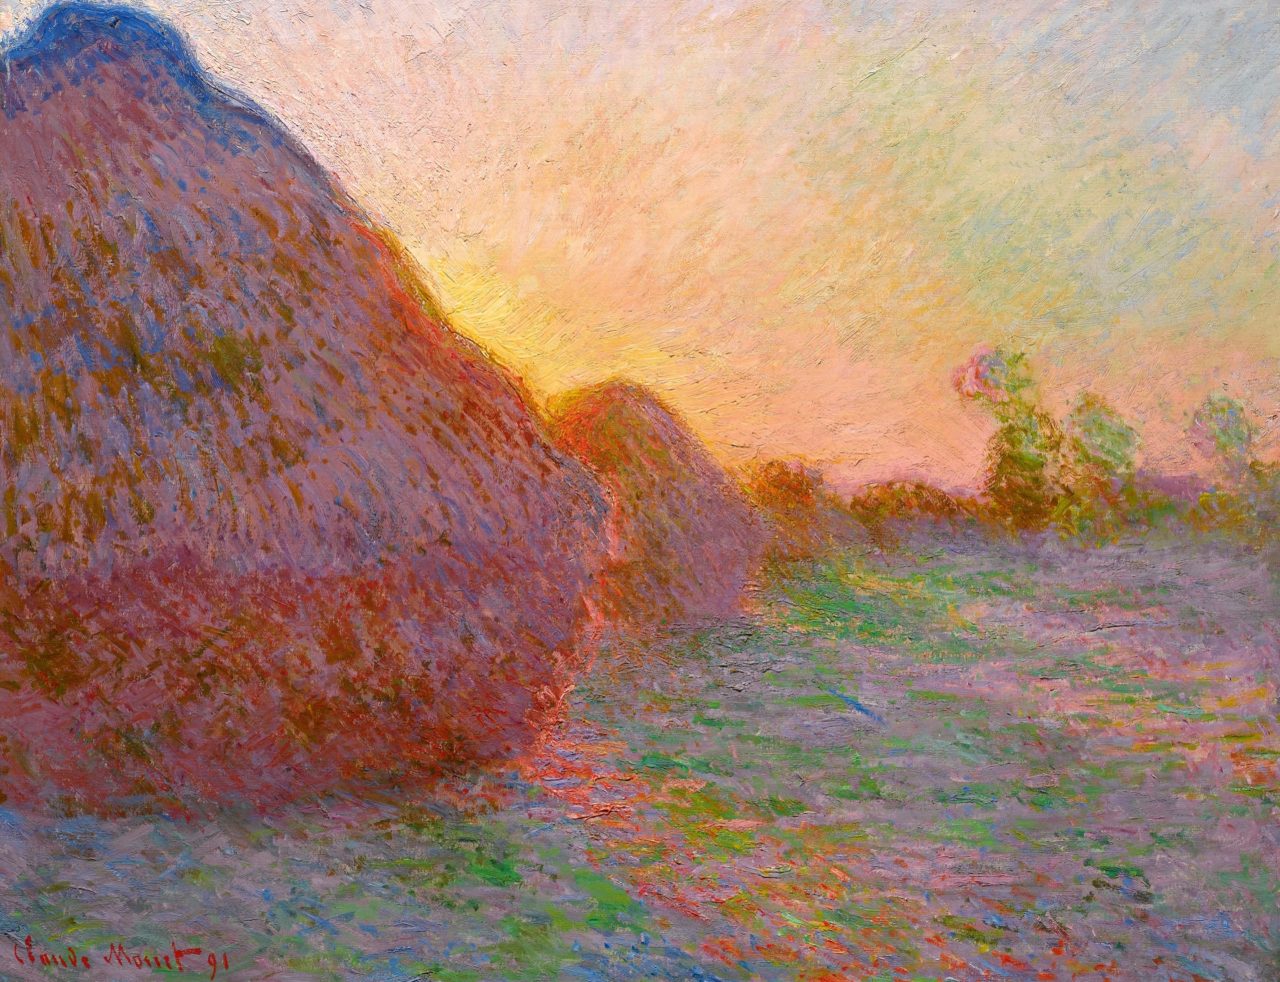 Monet’s Mueles which sold for 110,747,000 USD in May 2019, is the sort of consignment that Christie’s and Sotheby’s will often battle for